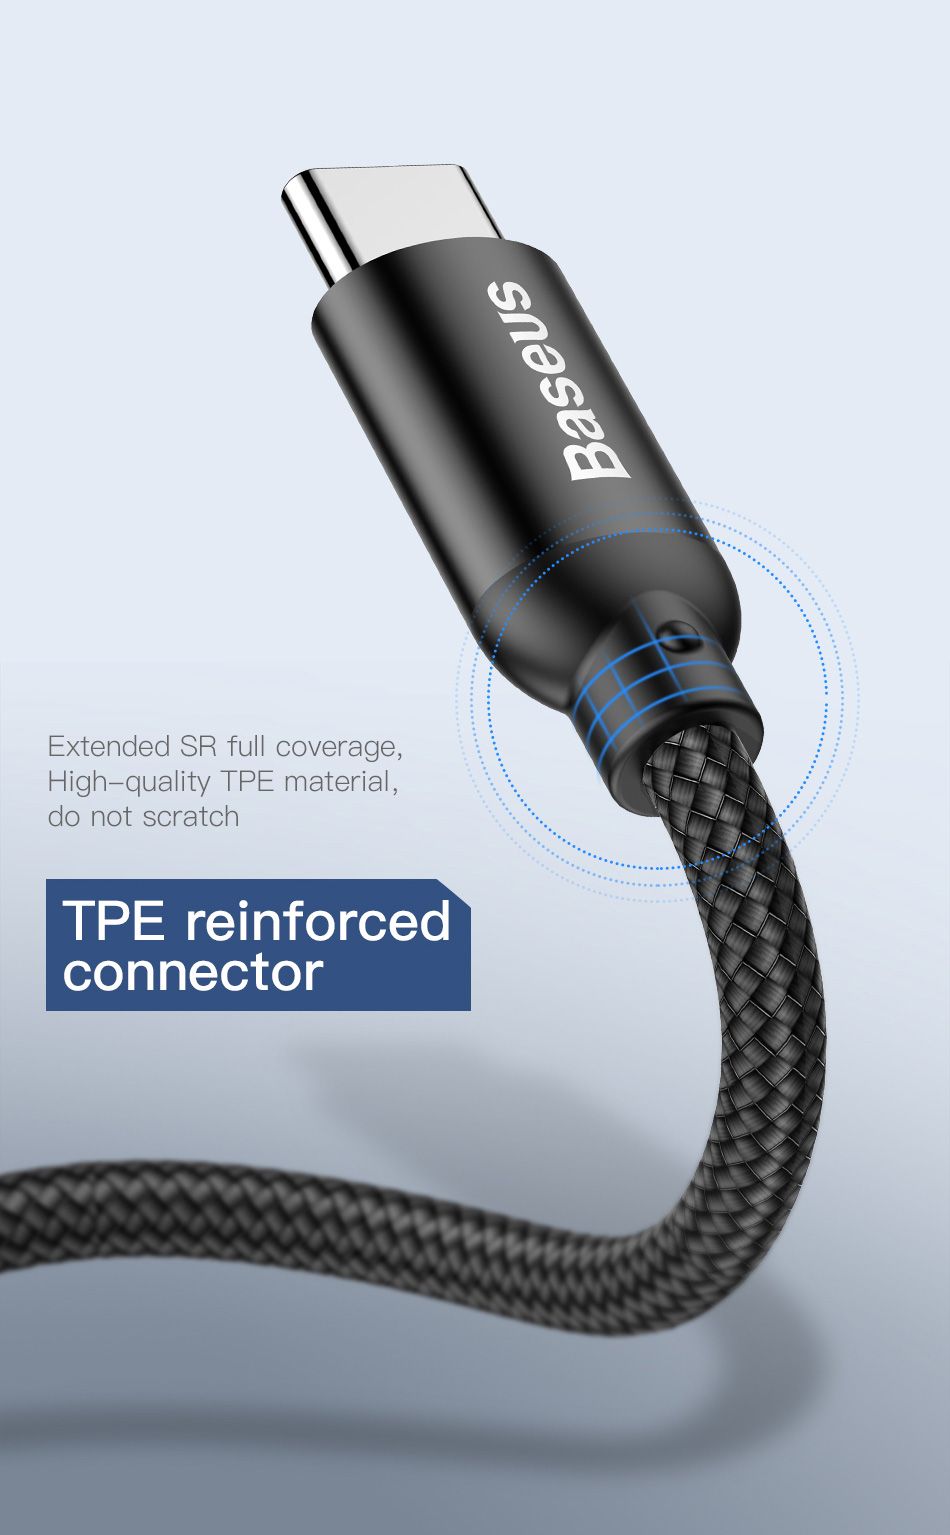 Baseus-24A-Type-C-High-density-Braided-Fast-Charging-Data-Cable-23cm-With-Micro-USB-Adapter-Buckle-1340565